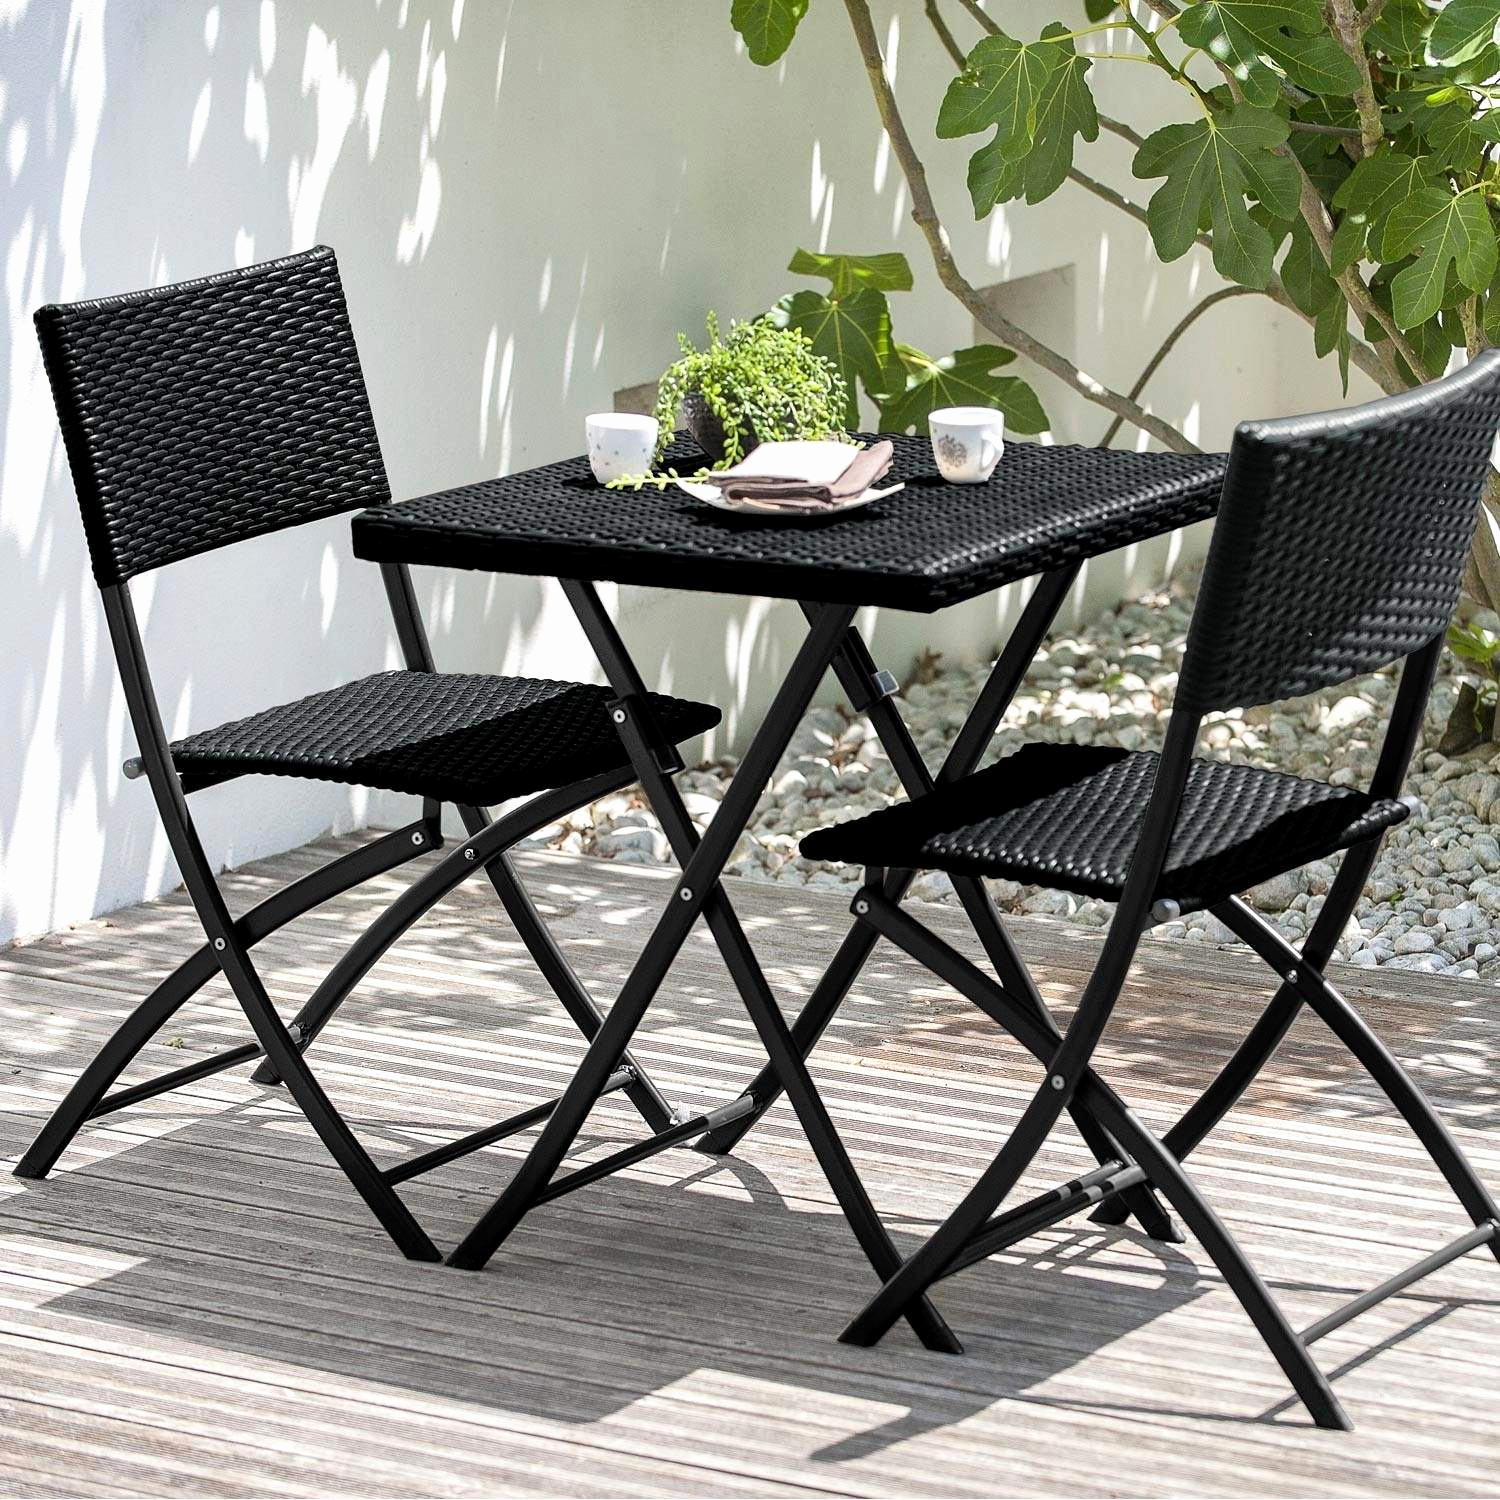 chaise bistrot alu photographie plus chaise jardin aluminium of chaise bistrot alu